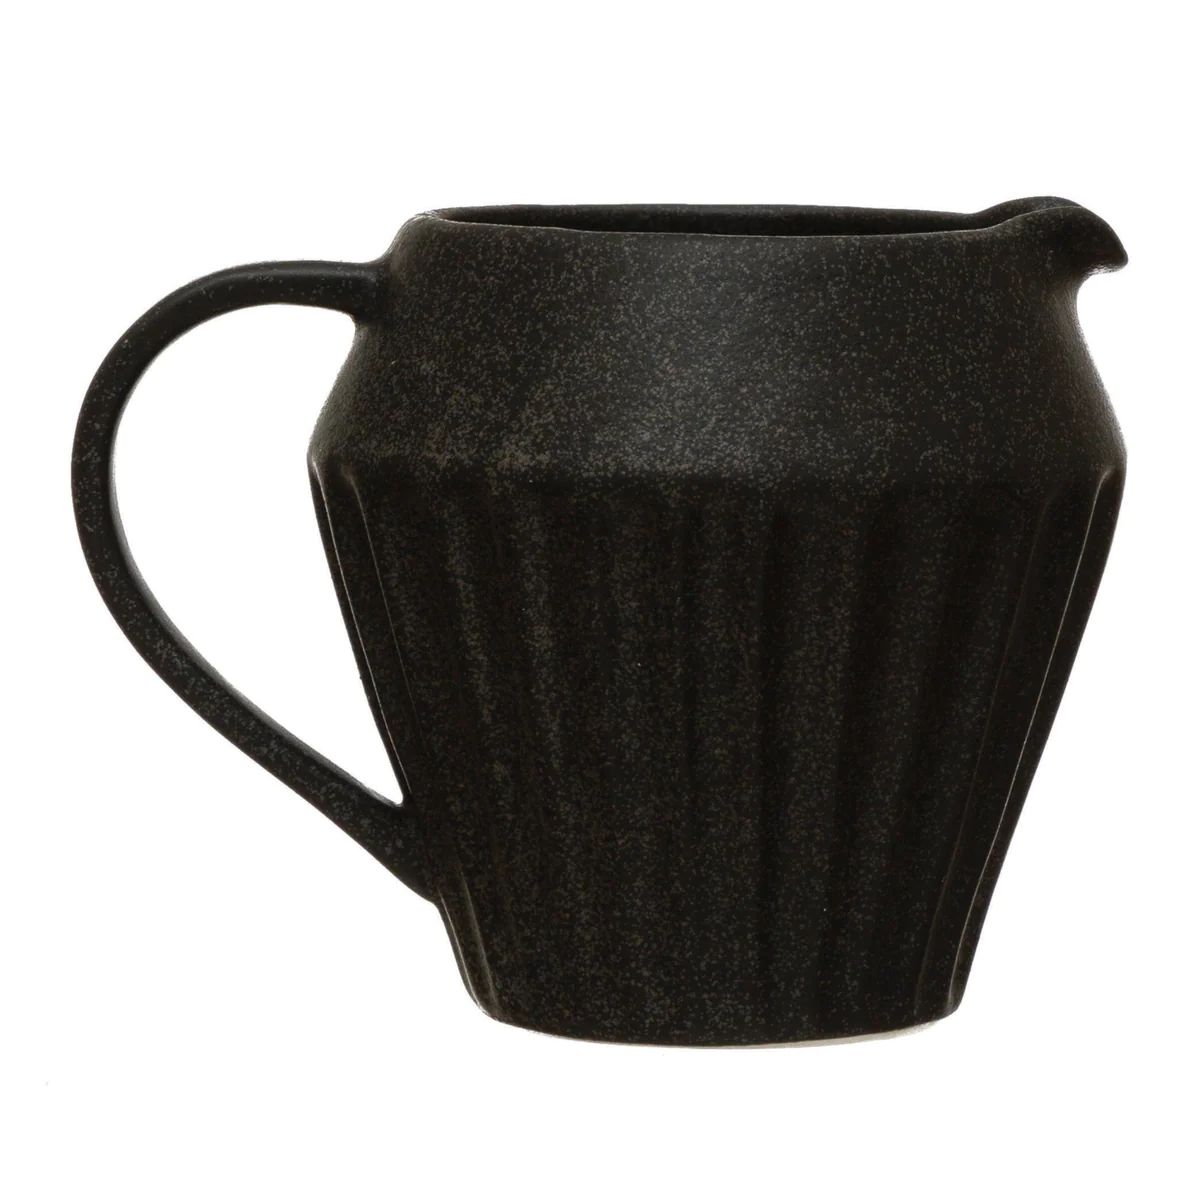 Matte Black Glaze Stoneware Pitcher | APIARY by The Busy Bee